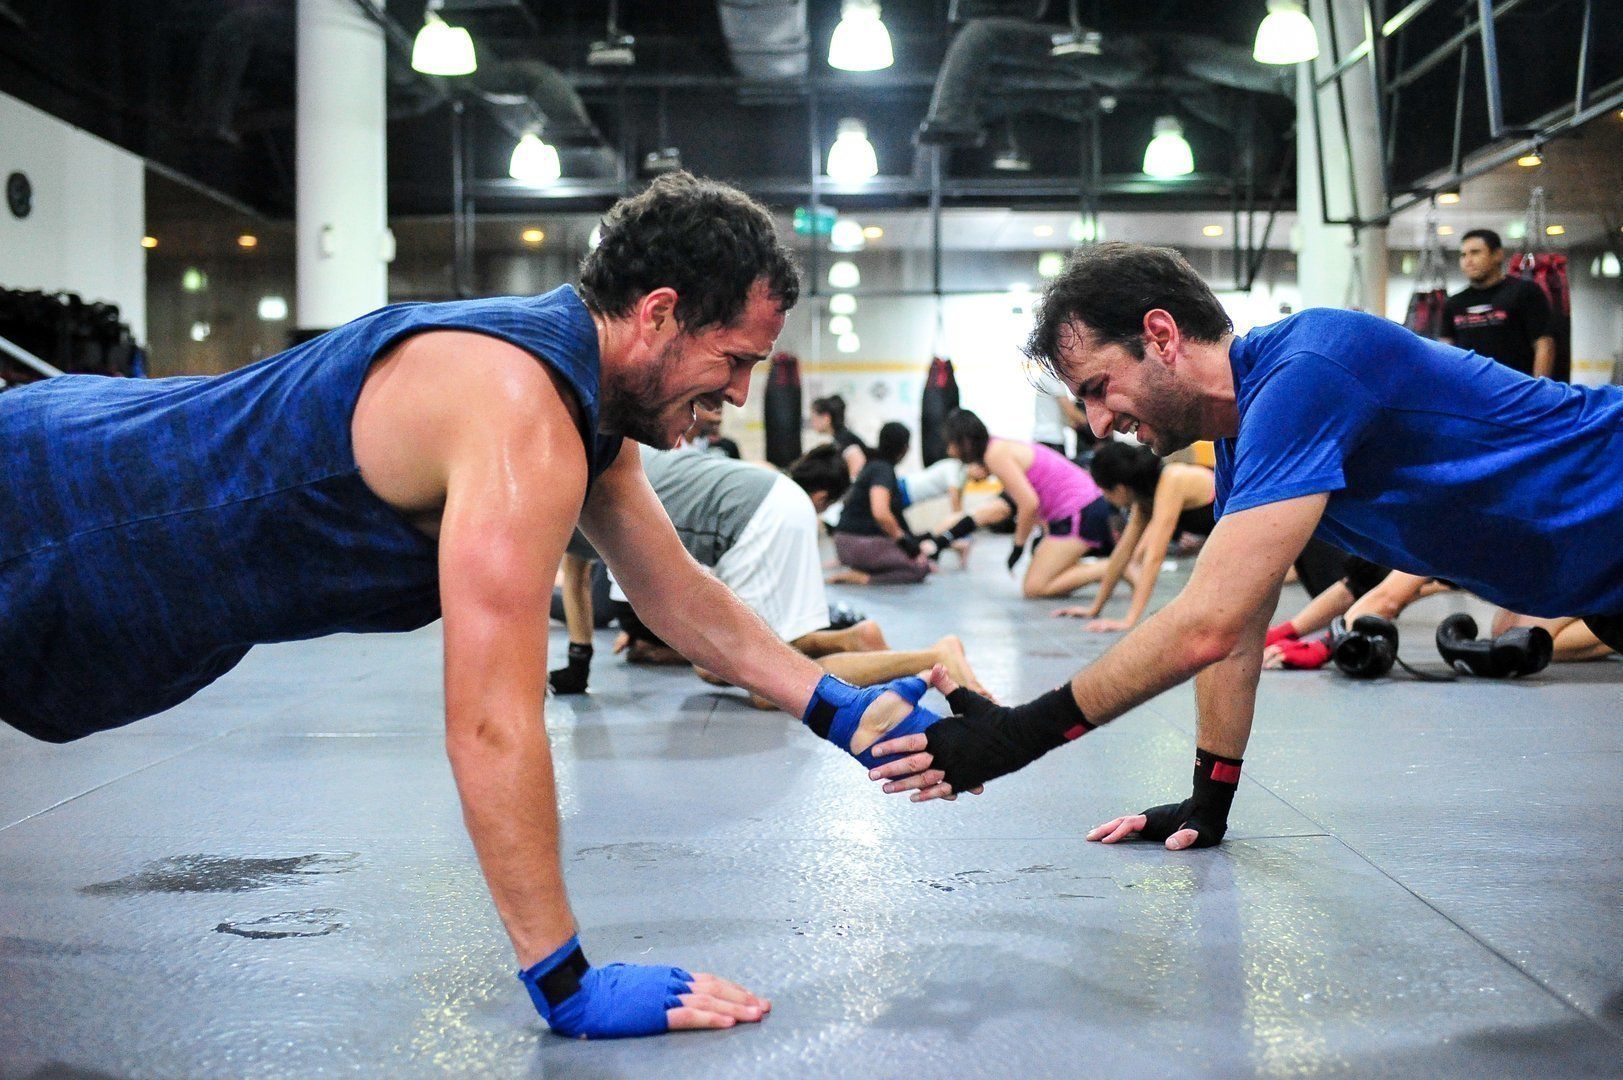 Two students doing push-ups during a Muay Thai class.